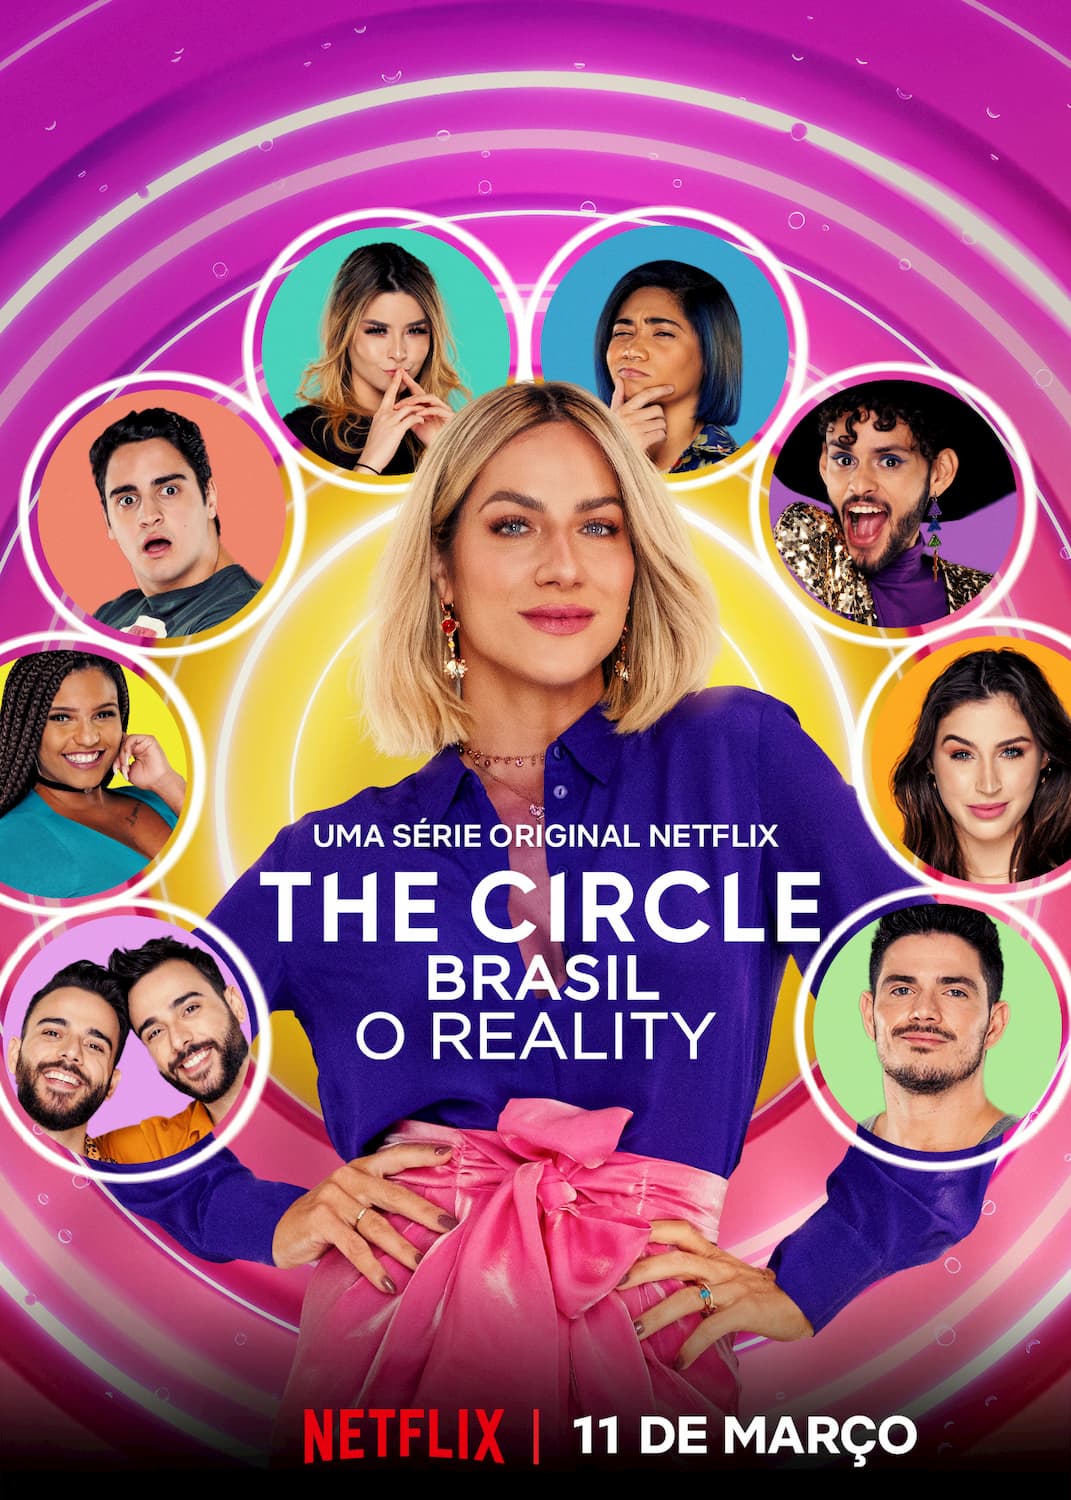 image from The Circle Brazil